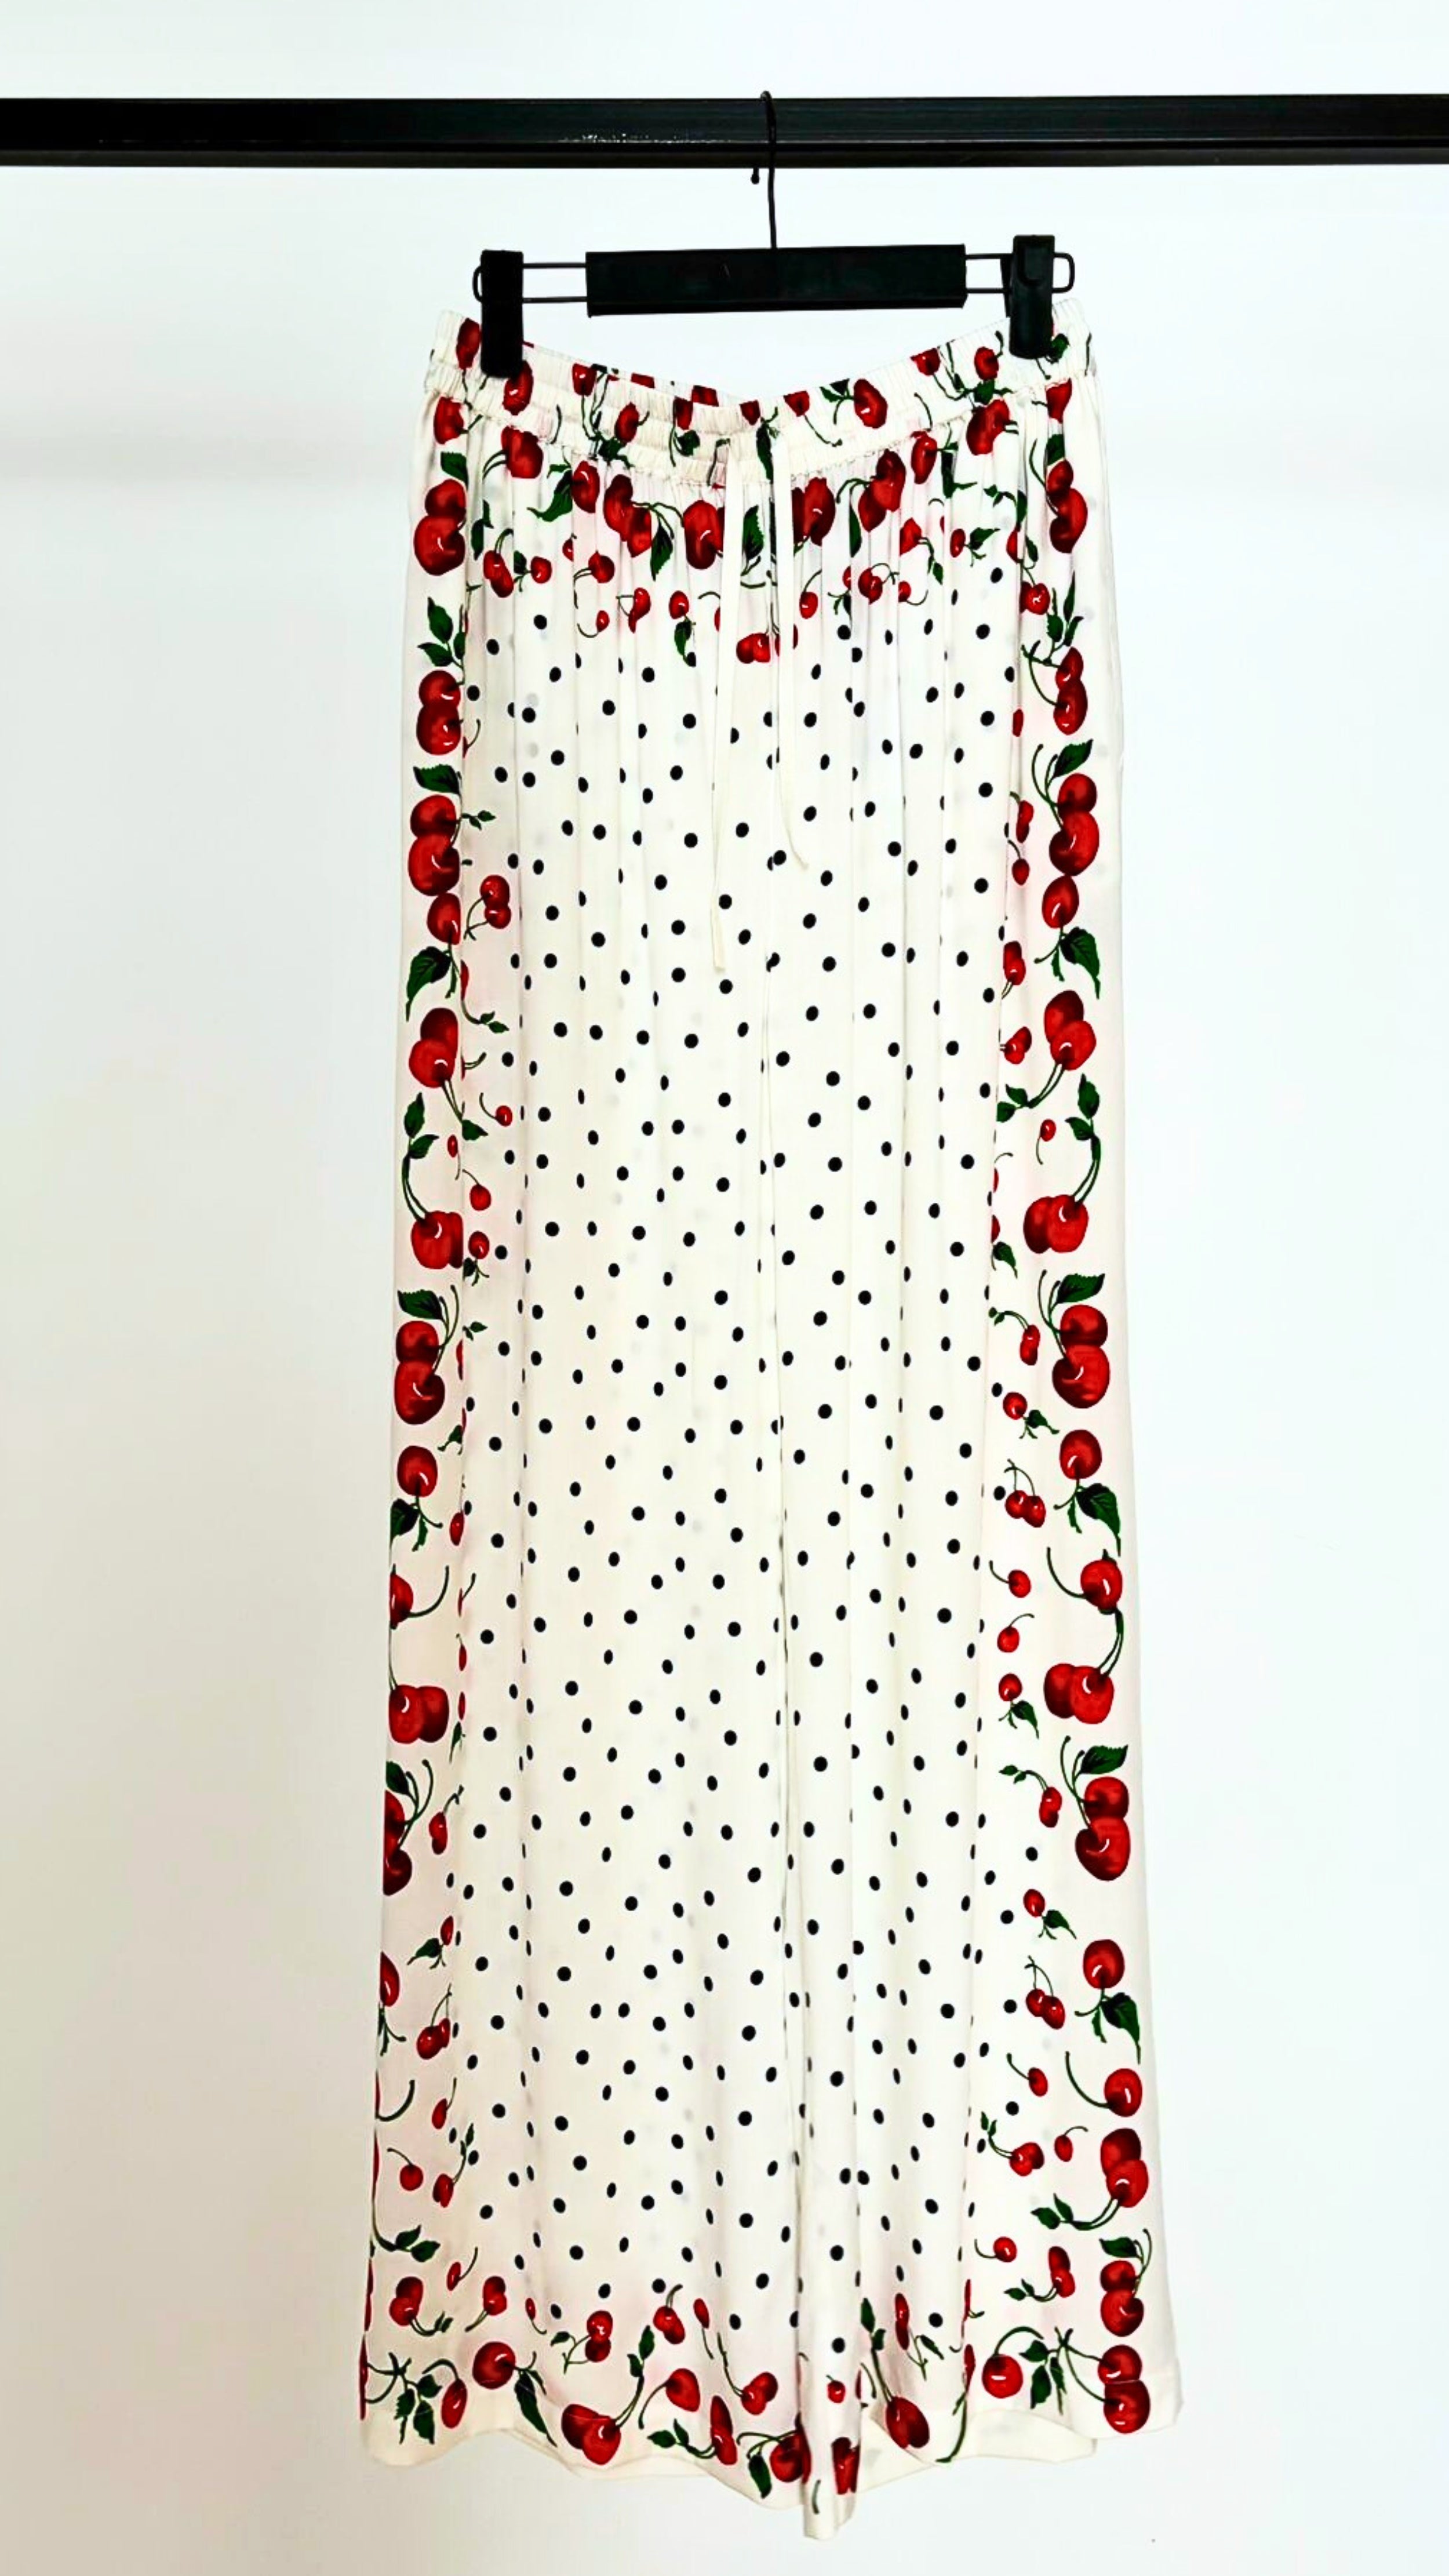 Leslie Amon Jaw String Cherry Pants. White drawstring loose fitting pants with an original cherry and polka dot print. Adjust waist. Shown hanging from the front.